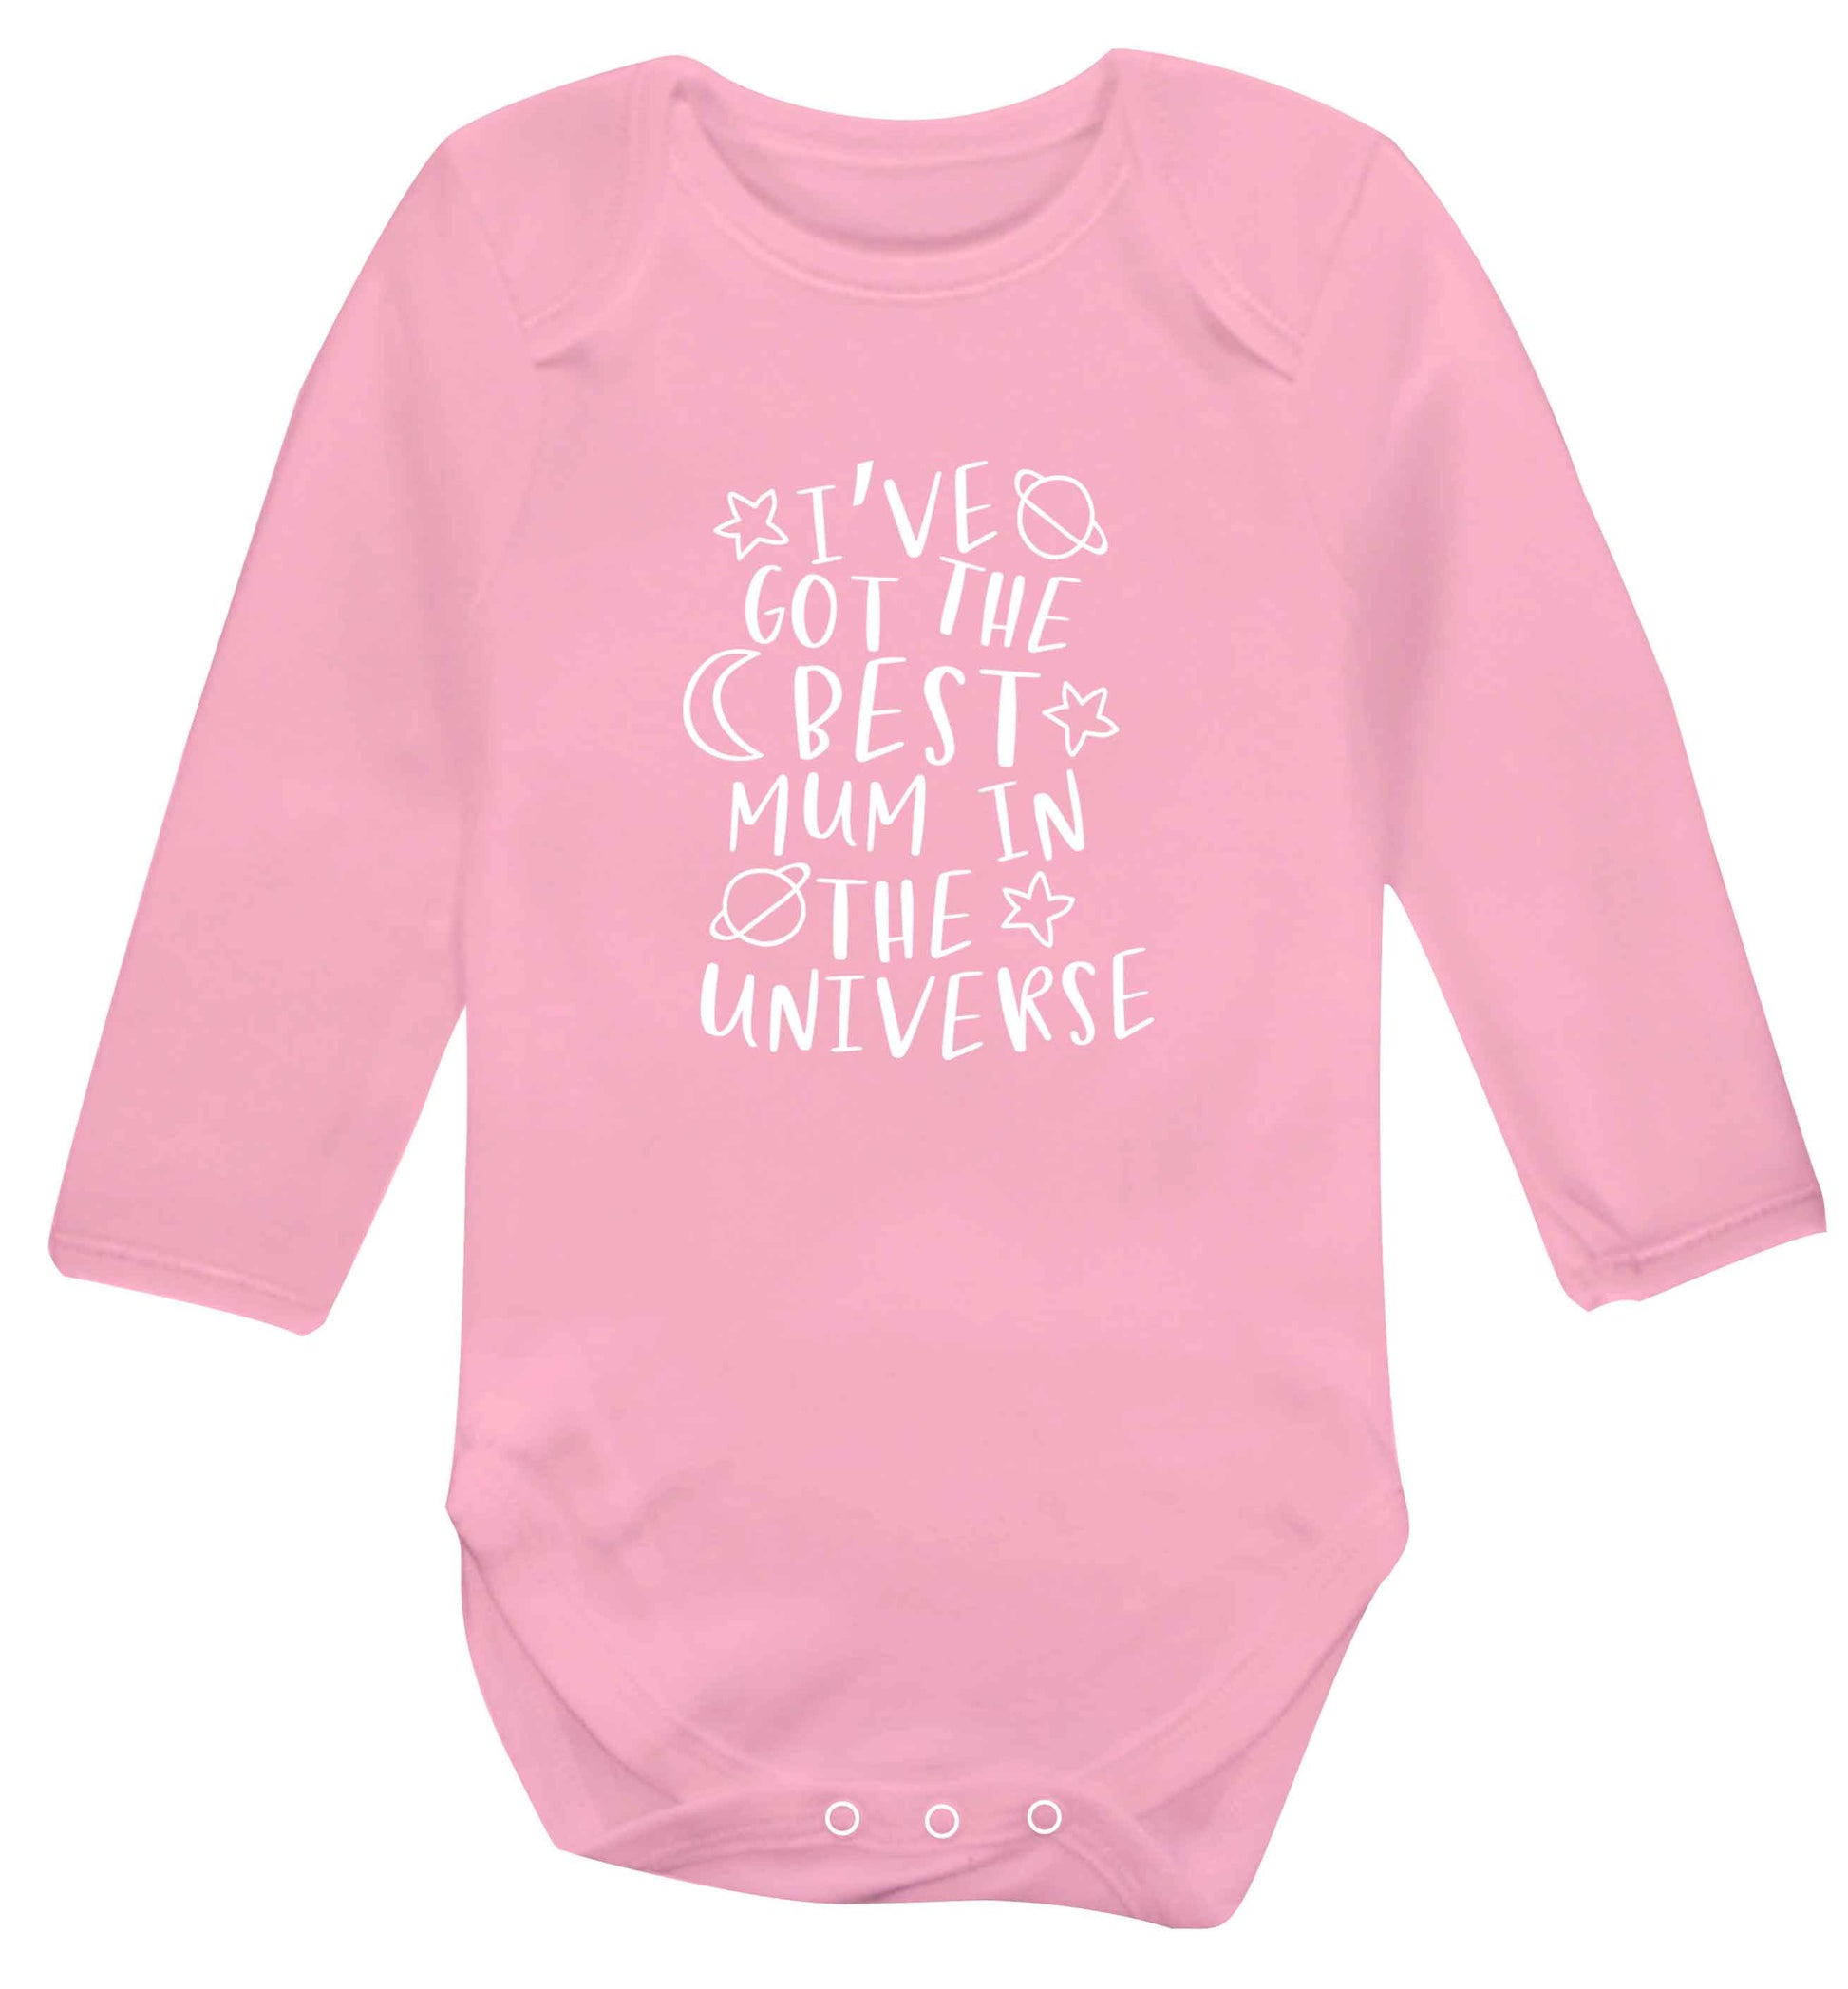 I've got the best mum in the universe baby vest long sleeved pale pink 6-12 months